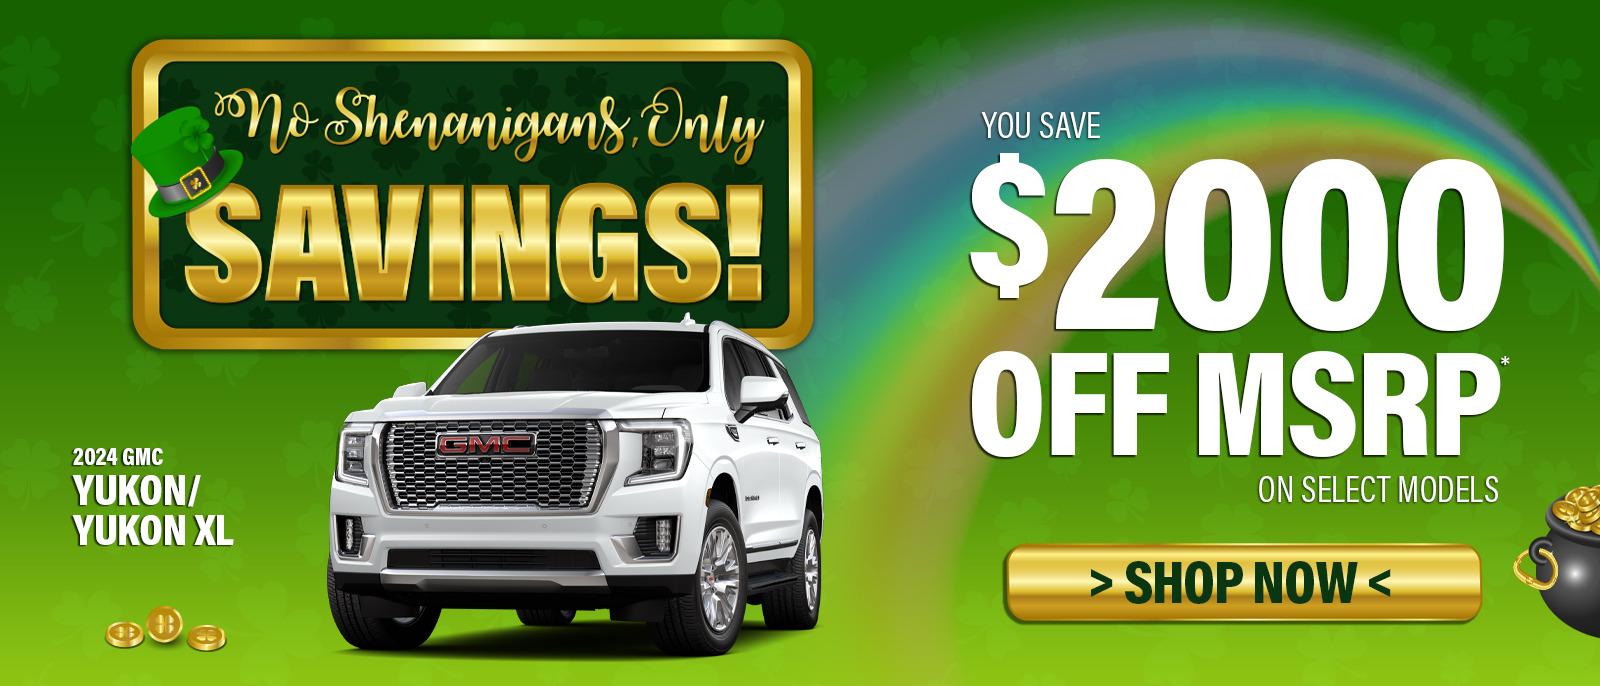 2024 GMC Yukon and Yukon XL: You Save $2000 Off MSRP on select models